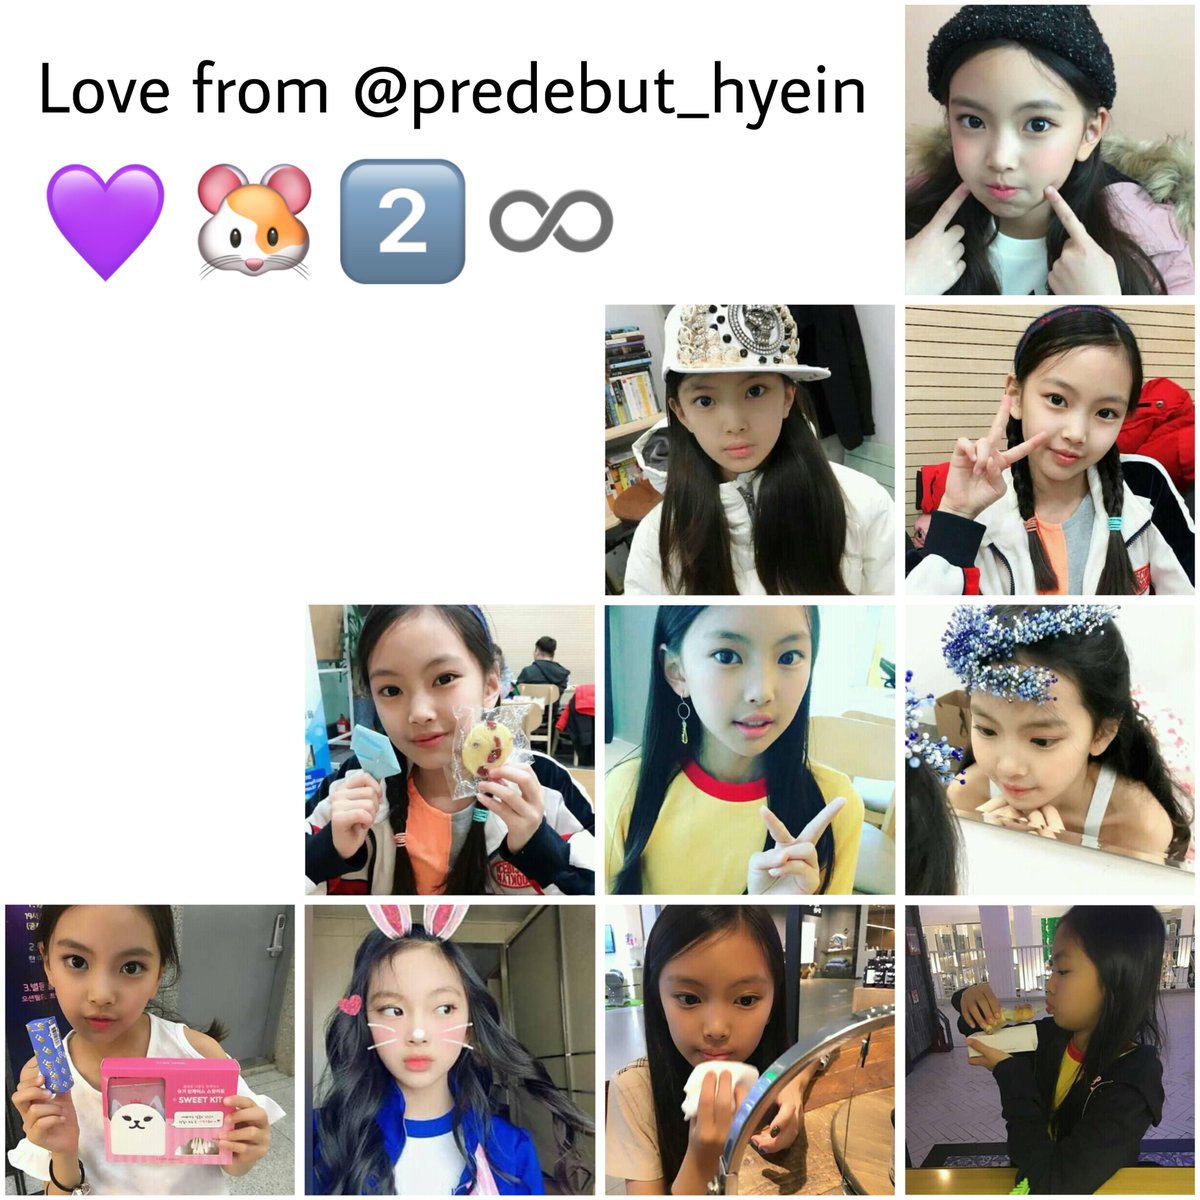 #NewJeans #Hyein #뉴진스 #혜인 #ヘイン #predebut

I love you to infinity💜

#오늘혠스터생일이얌_헷
#HAPPY_HYEIN_DAY